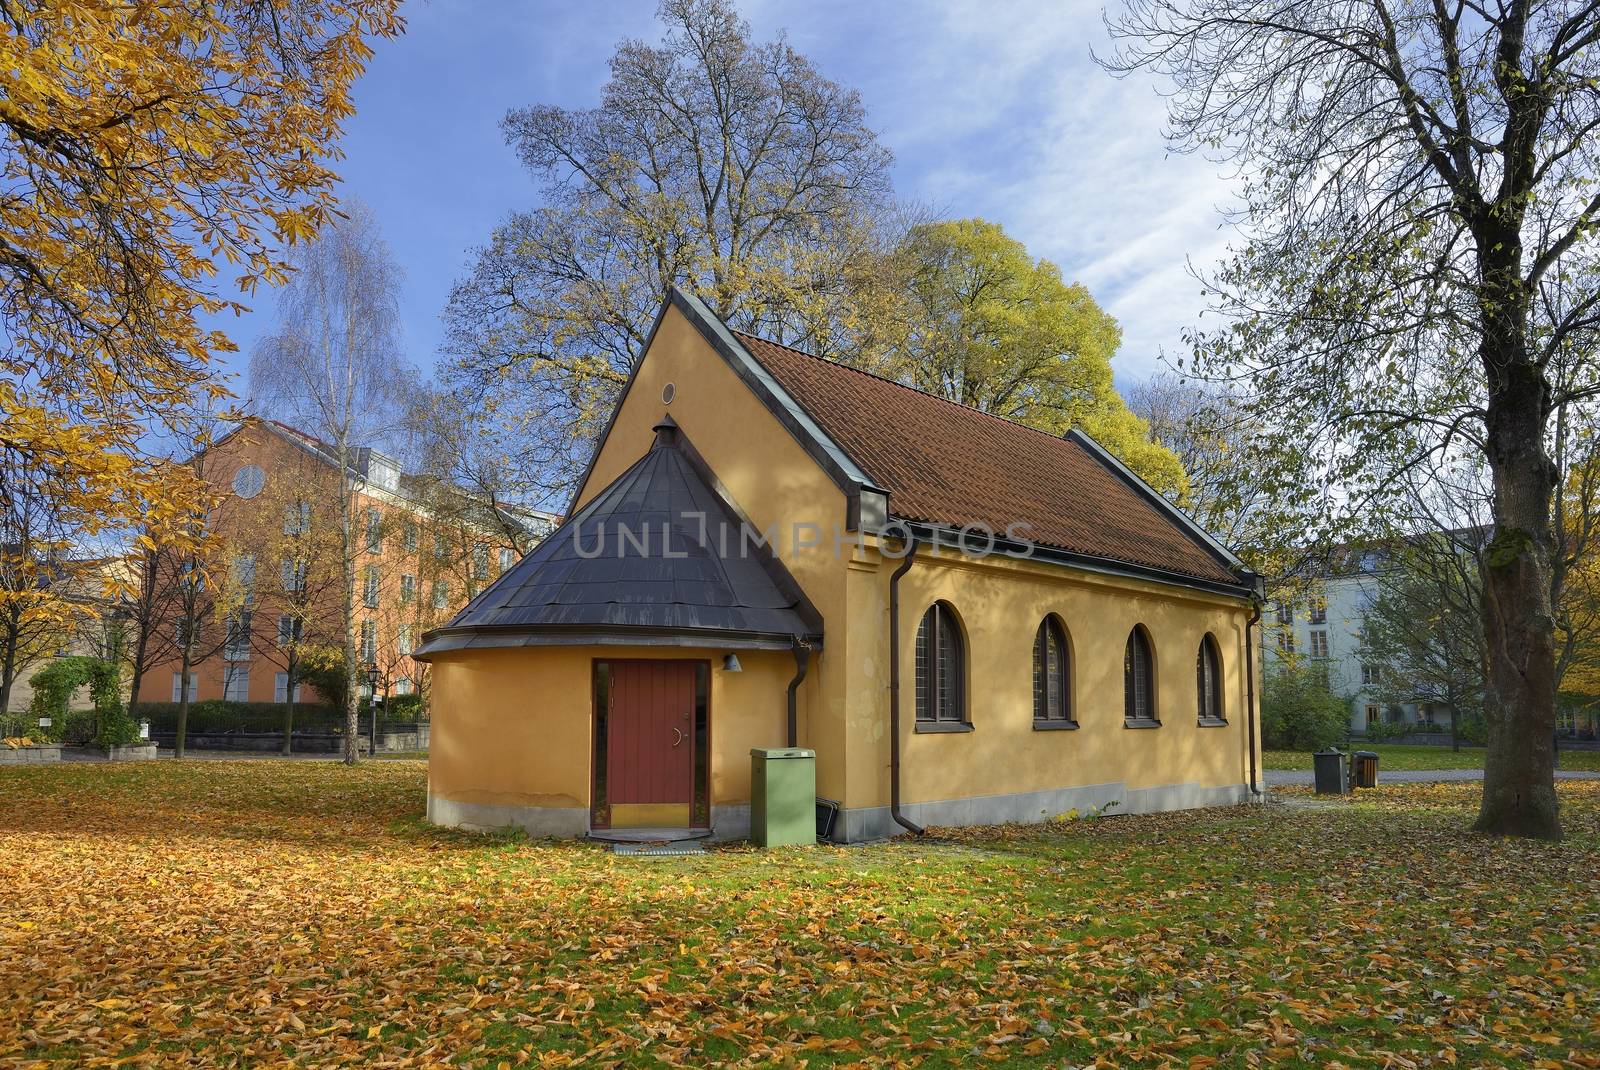 Beautiful fall Chapel in Stockholm (Sweden). Leafs are turning red and have fallen all around it.